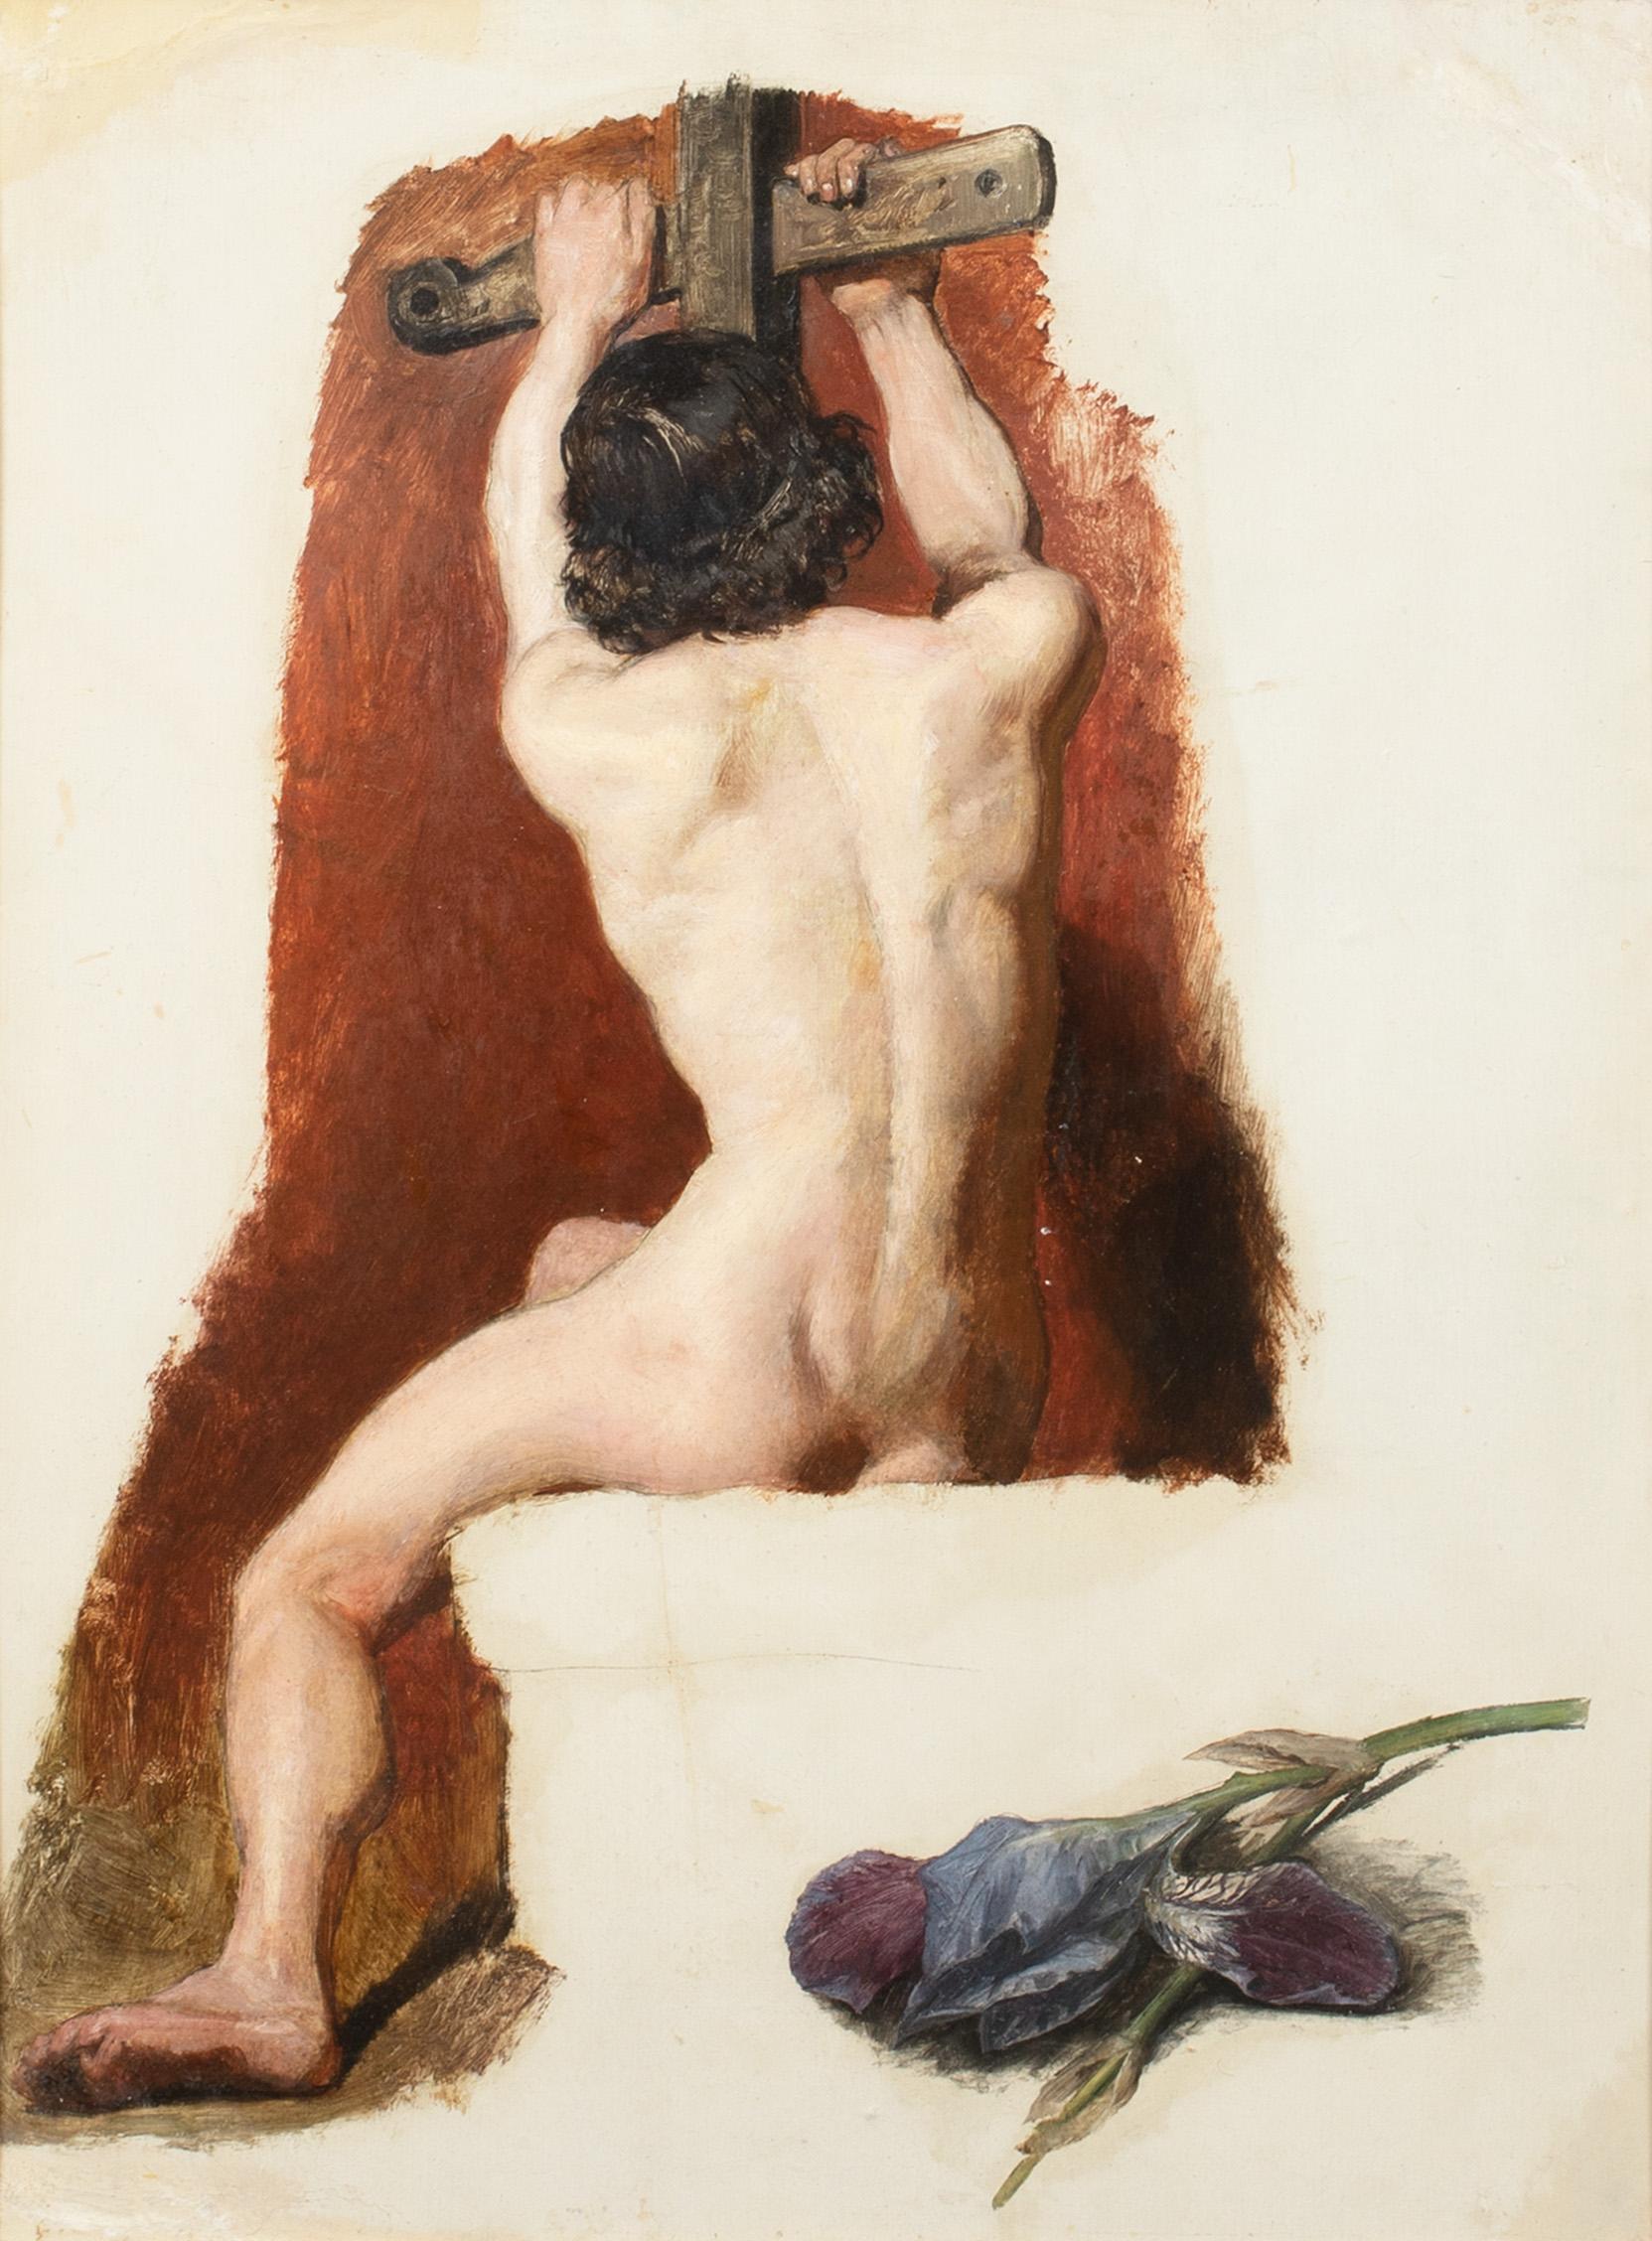 Portrait Of A Nude Male Holding A Crucifix, 19th Century - Beige Still-Life Painting by William Etty R.A.